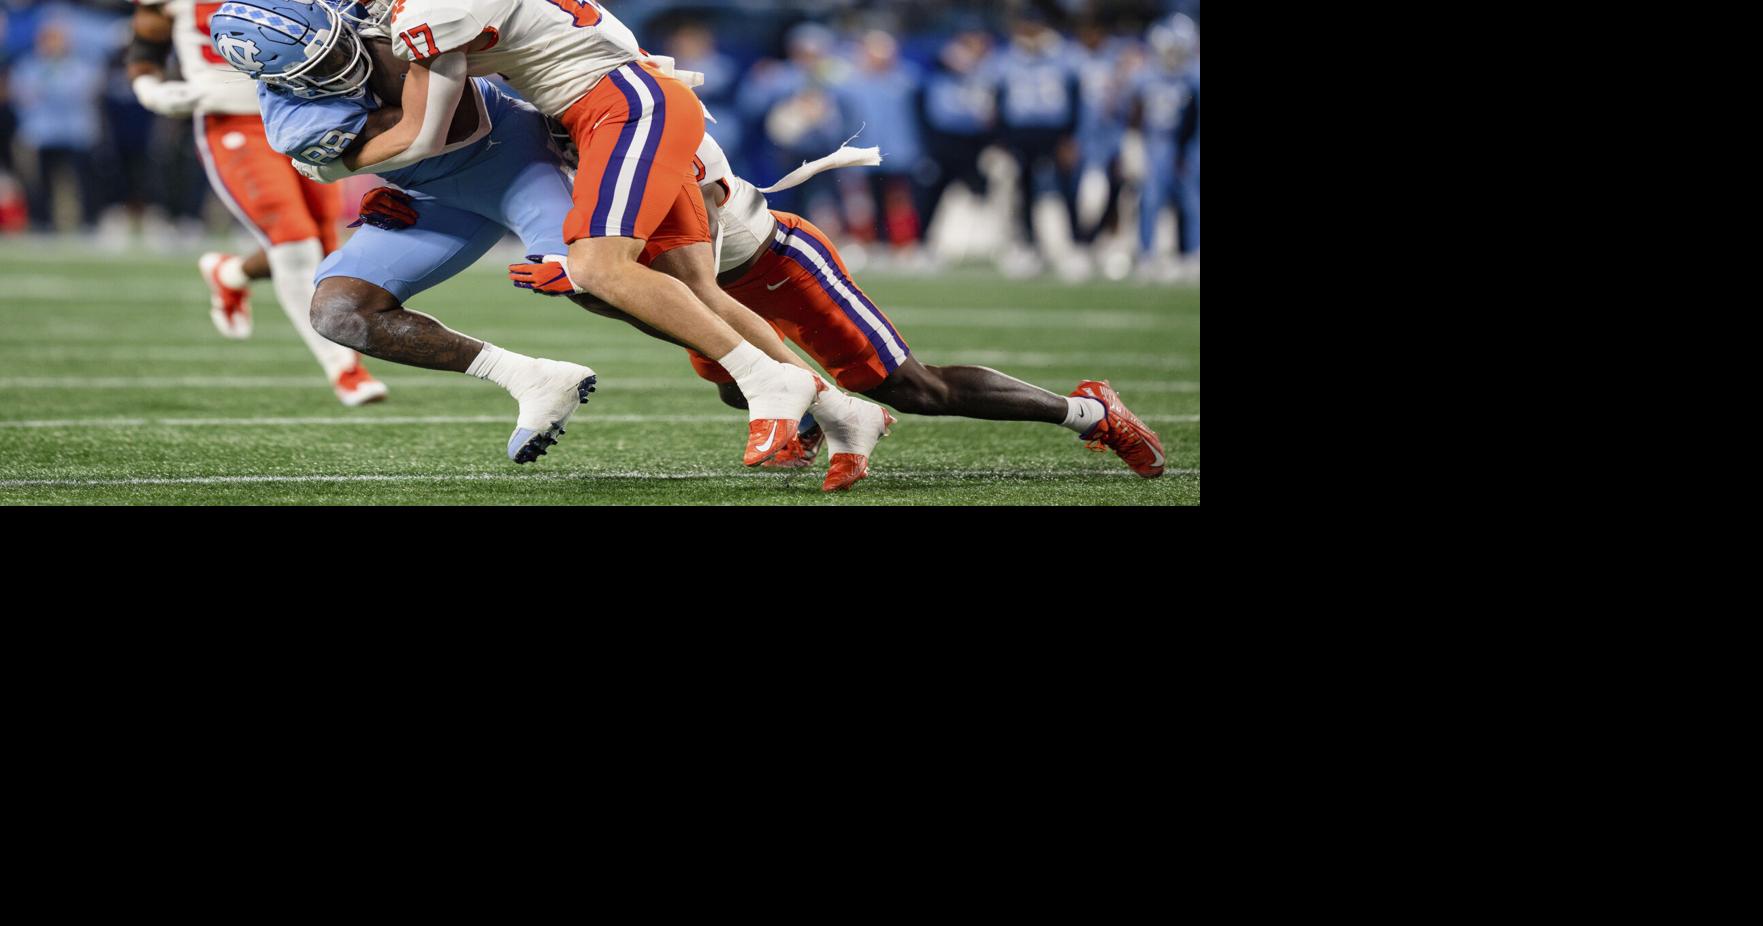 Carter's Corner: Gators Can Take Another Step Up Mountain With